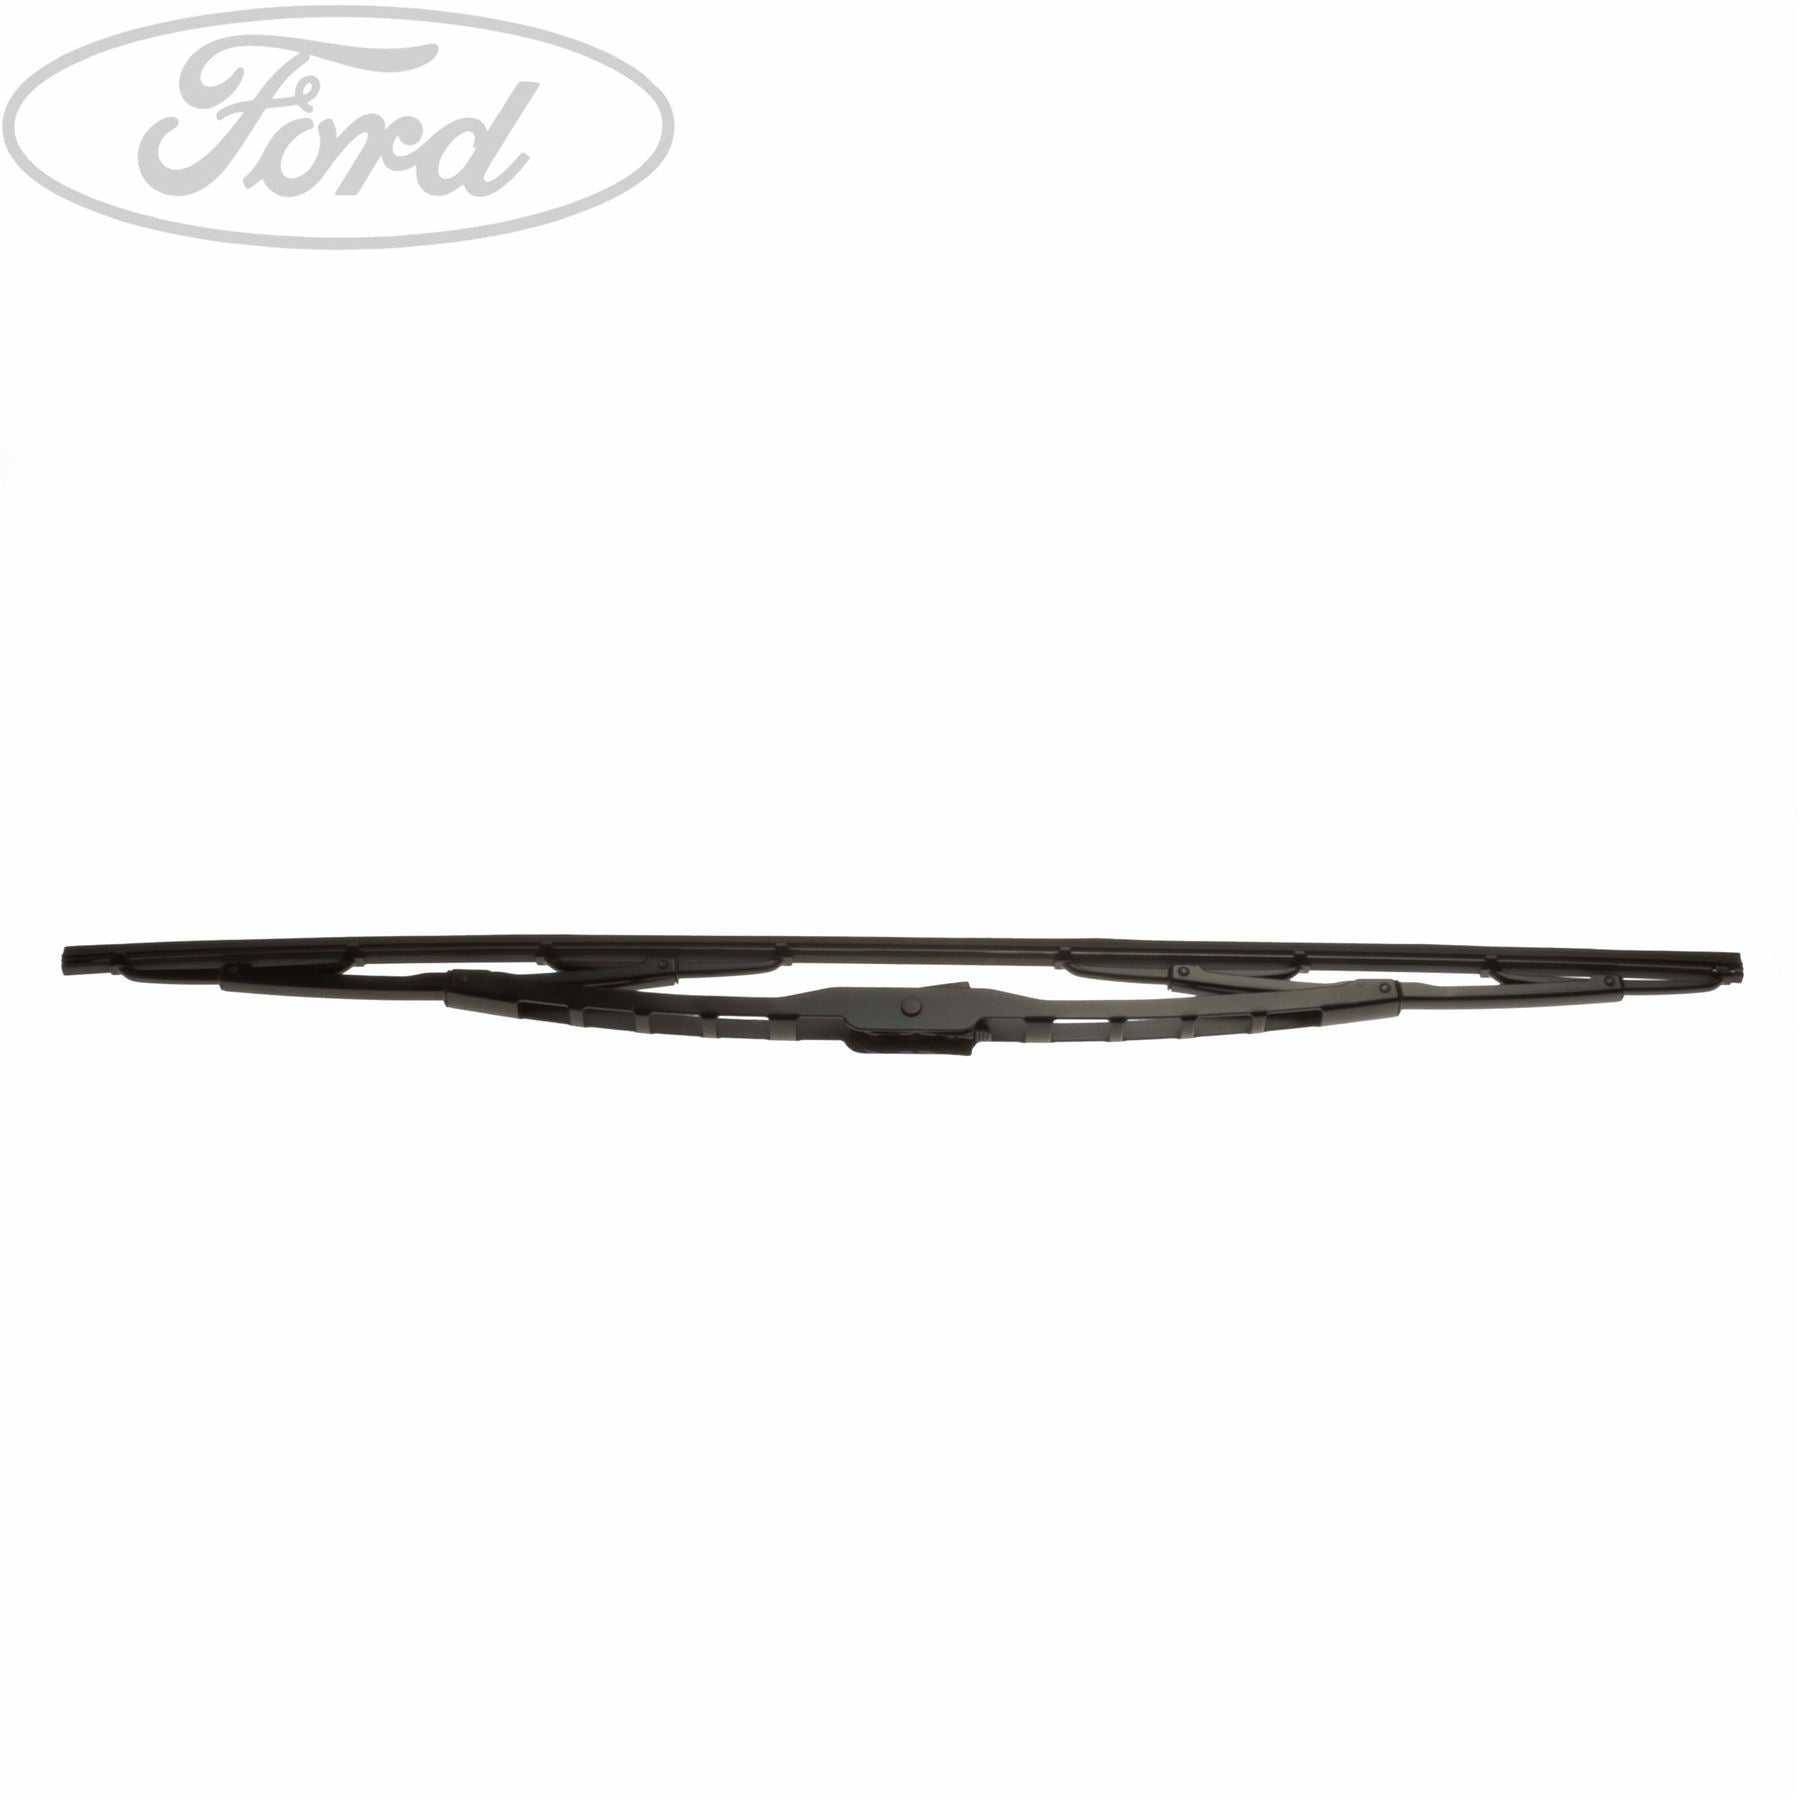 Ford, TRANSIT 2006 - 2014 FRONT WIPER BLADE 21"